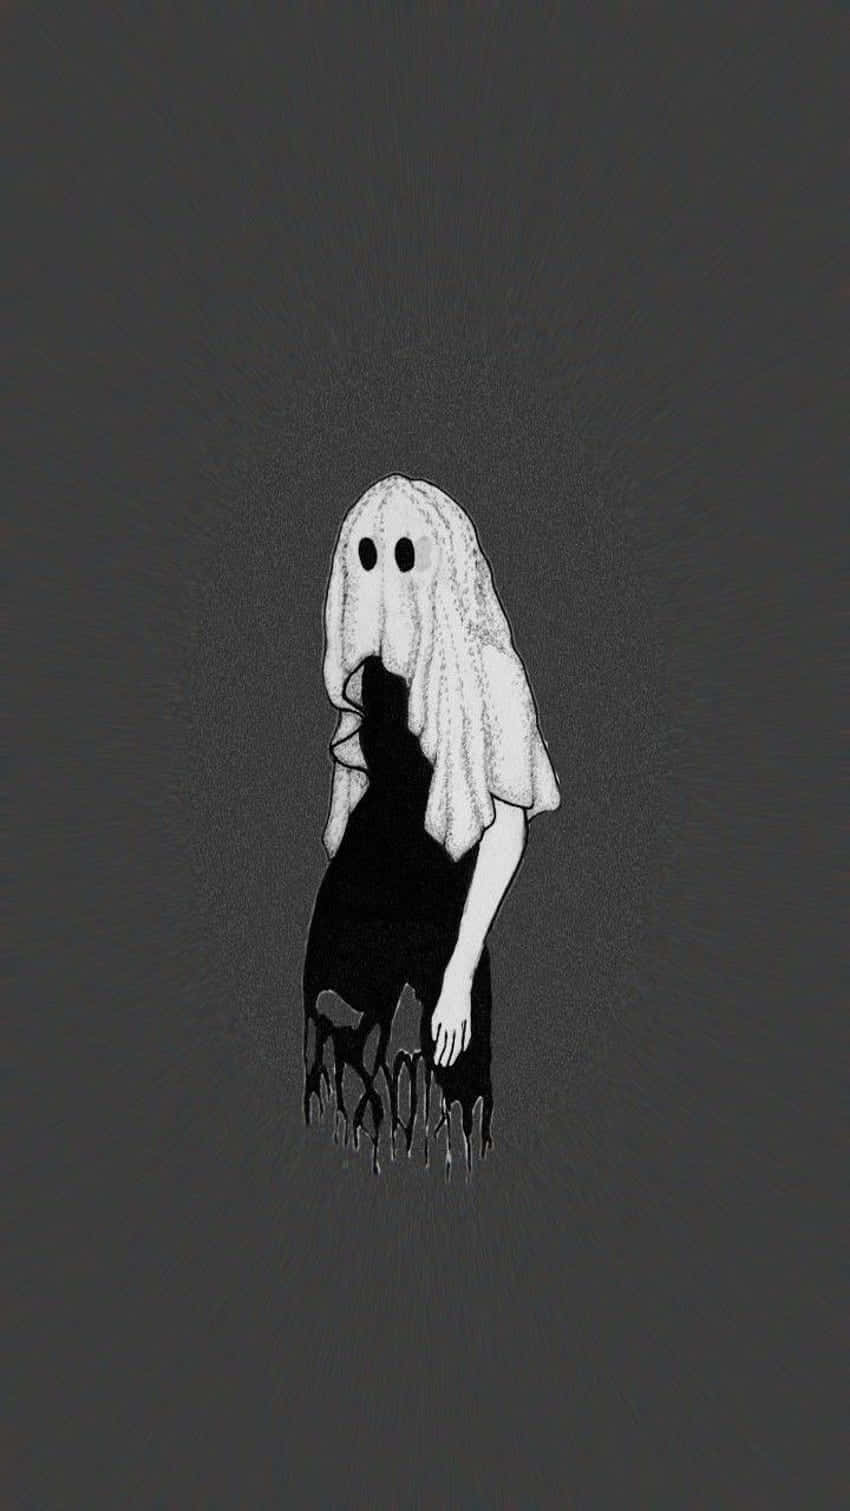 A black and white image of an evil ghost - Horror